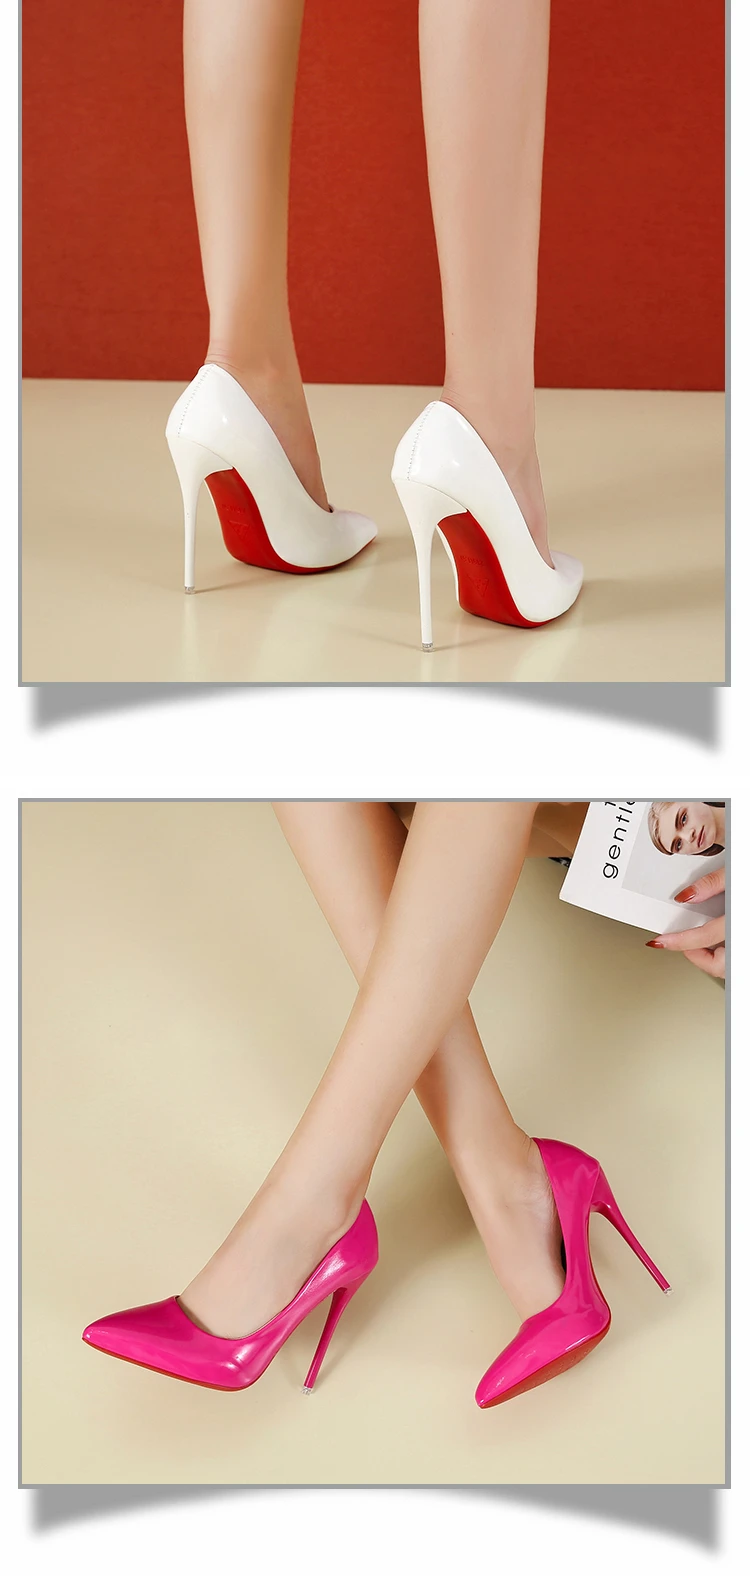 Women Shoes Red Sole High Heels Sexy Pointed Toe 12cm Pumps Wedding Dress  Shoes Nude Black Color Red Rubber Bottom High Heels - AliExpress